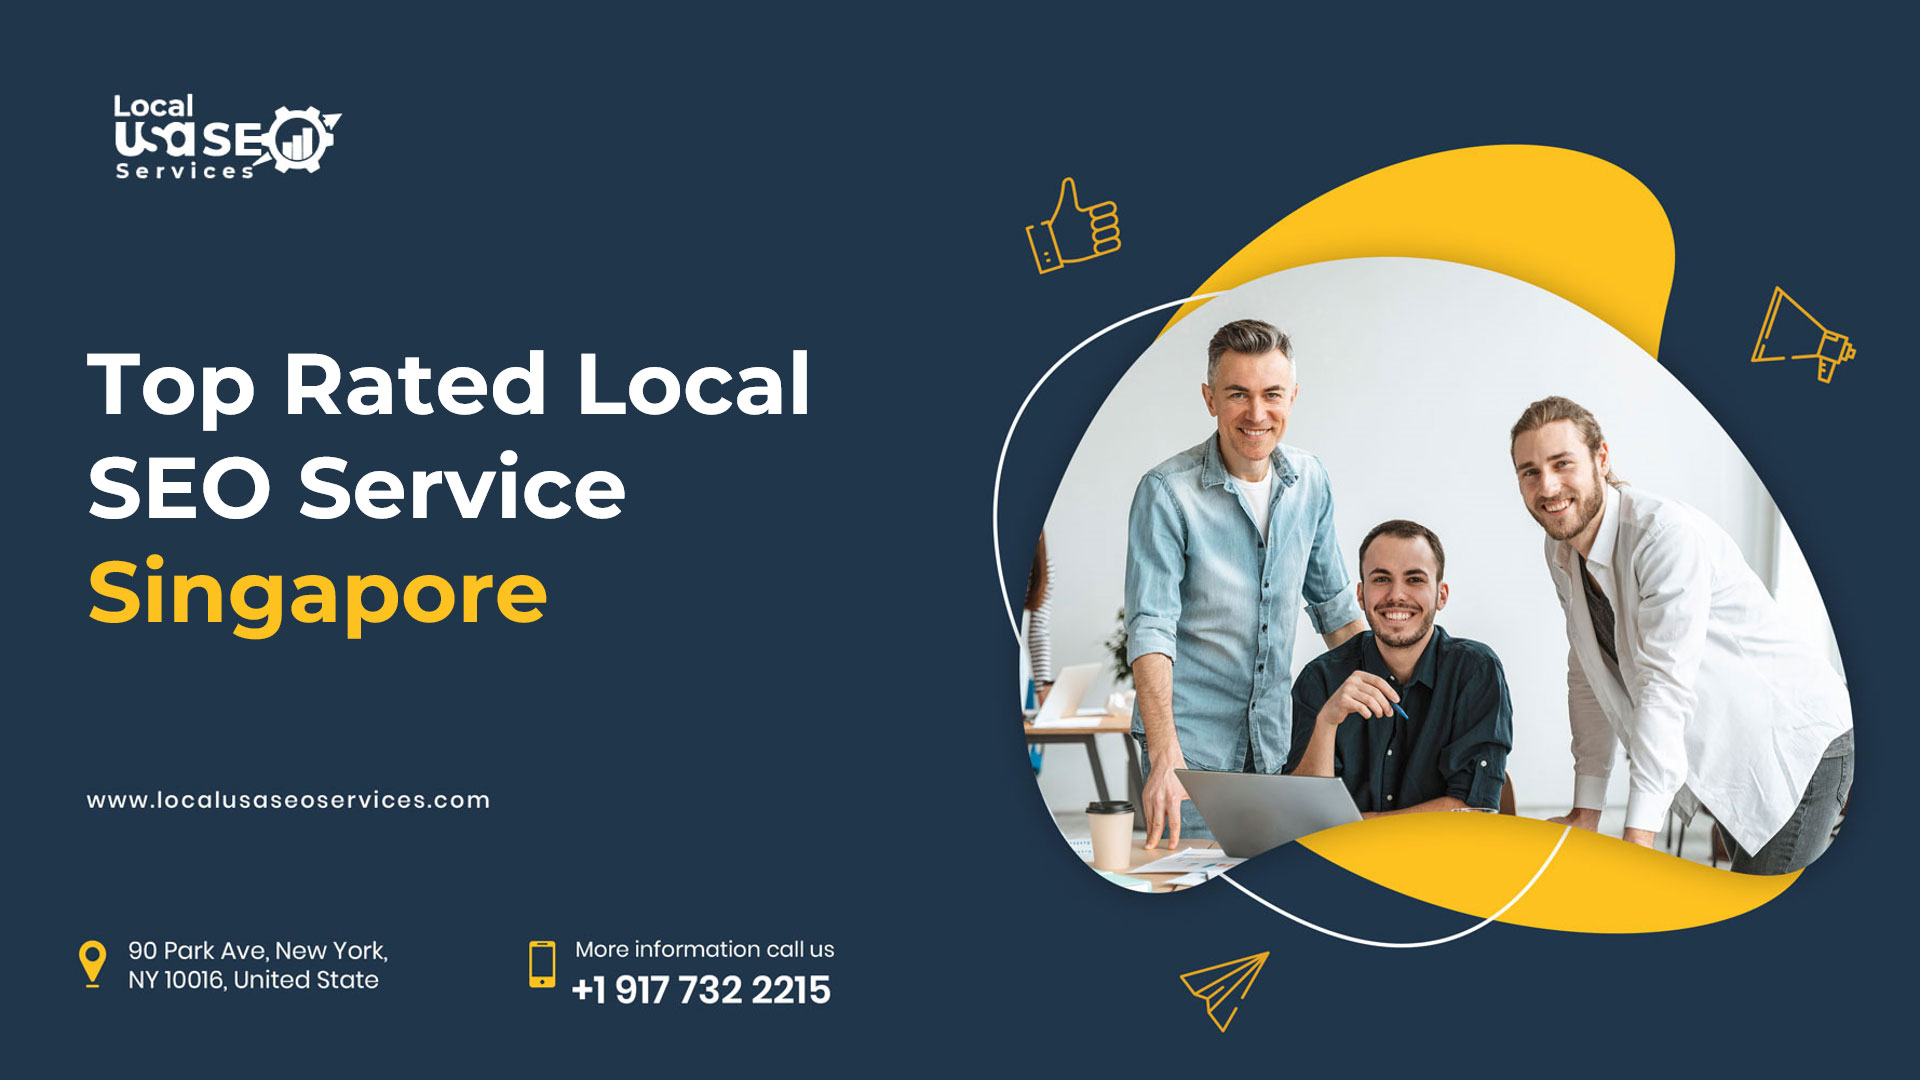 Top Rated Local SEO Service Singapore